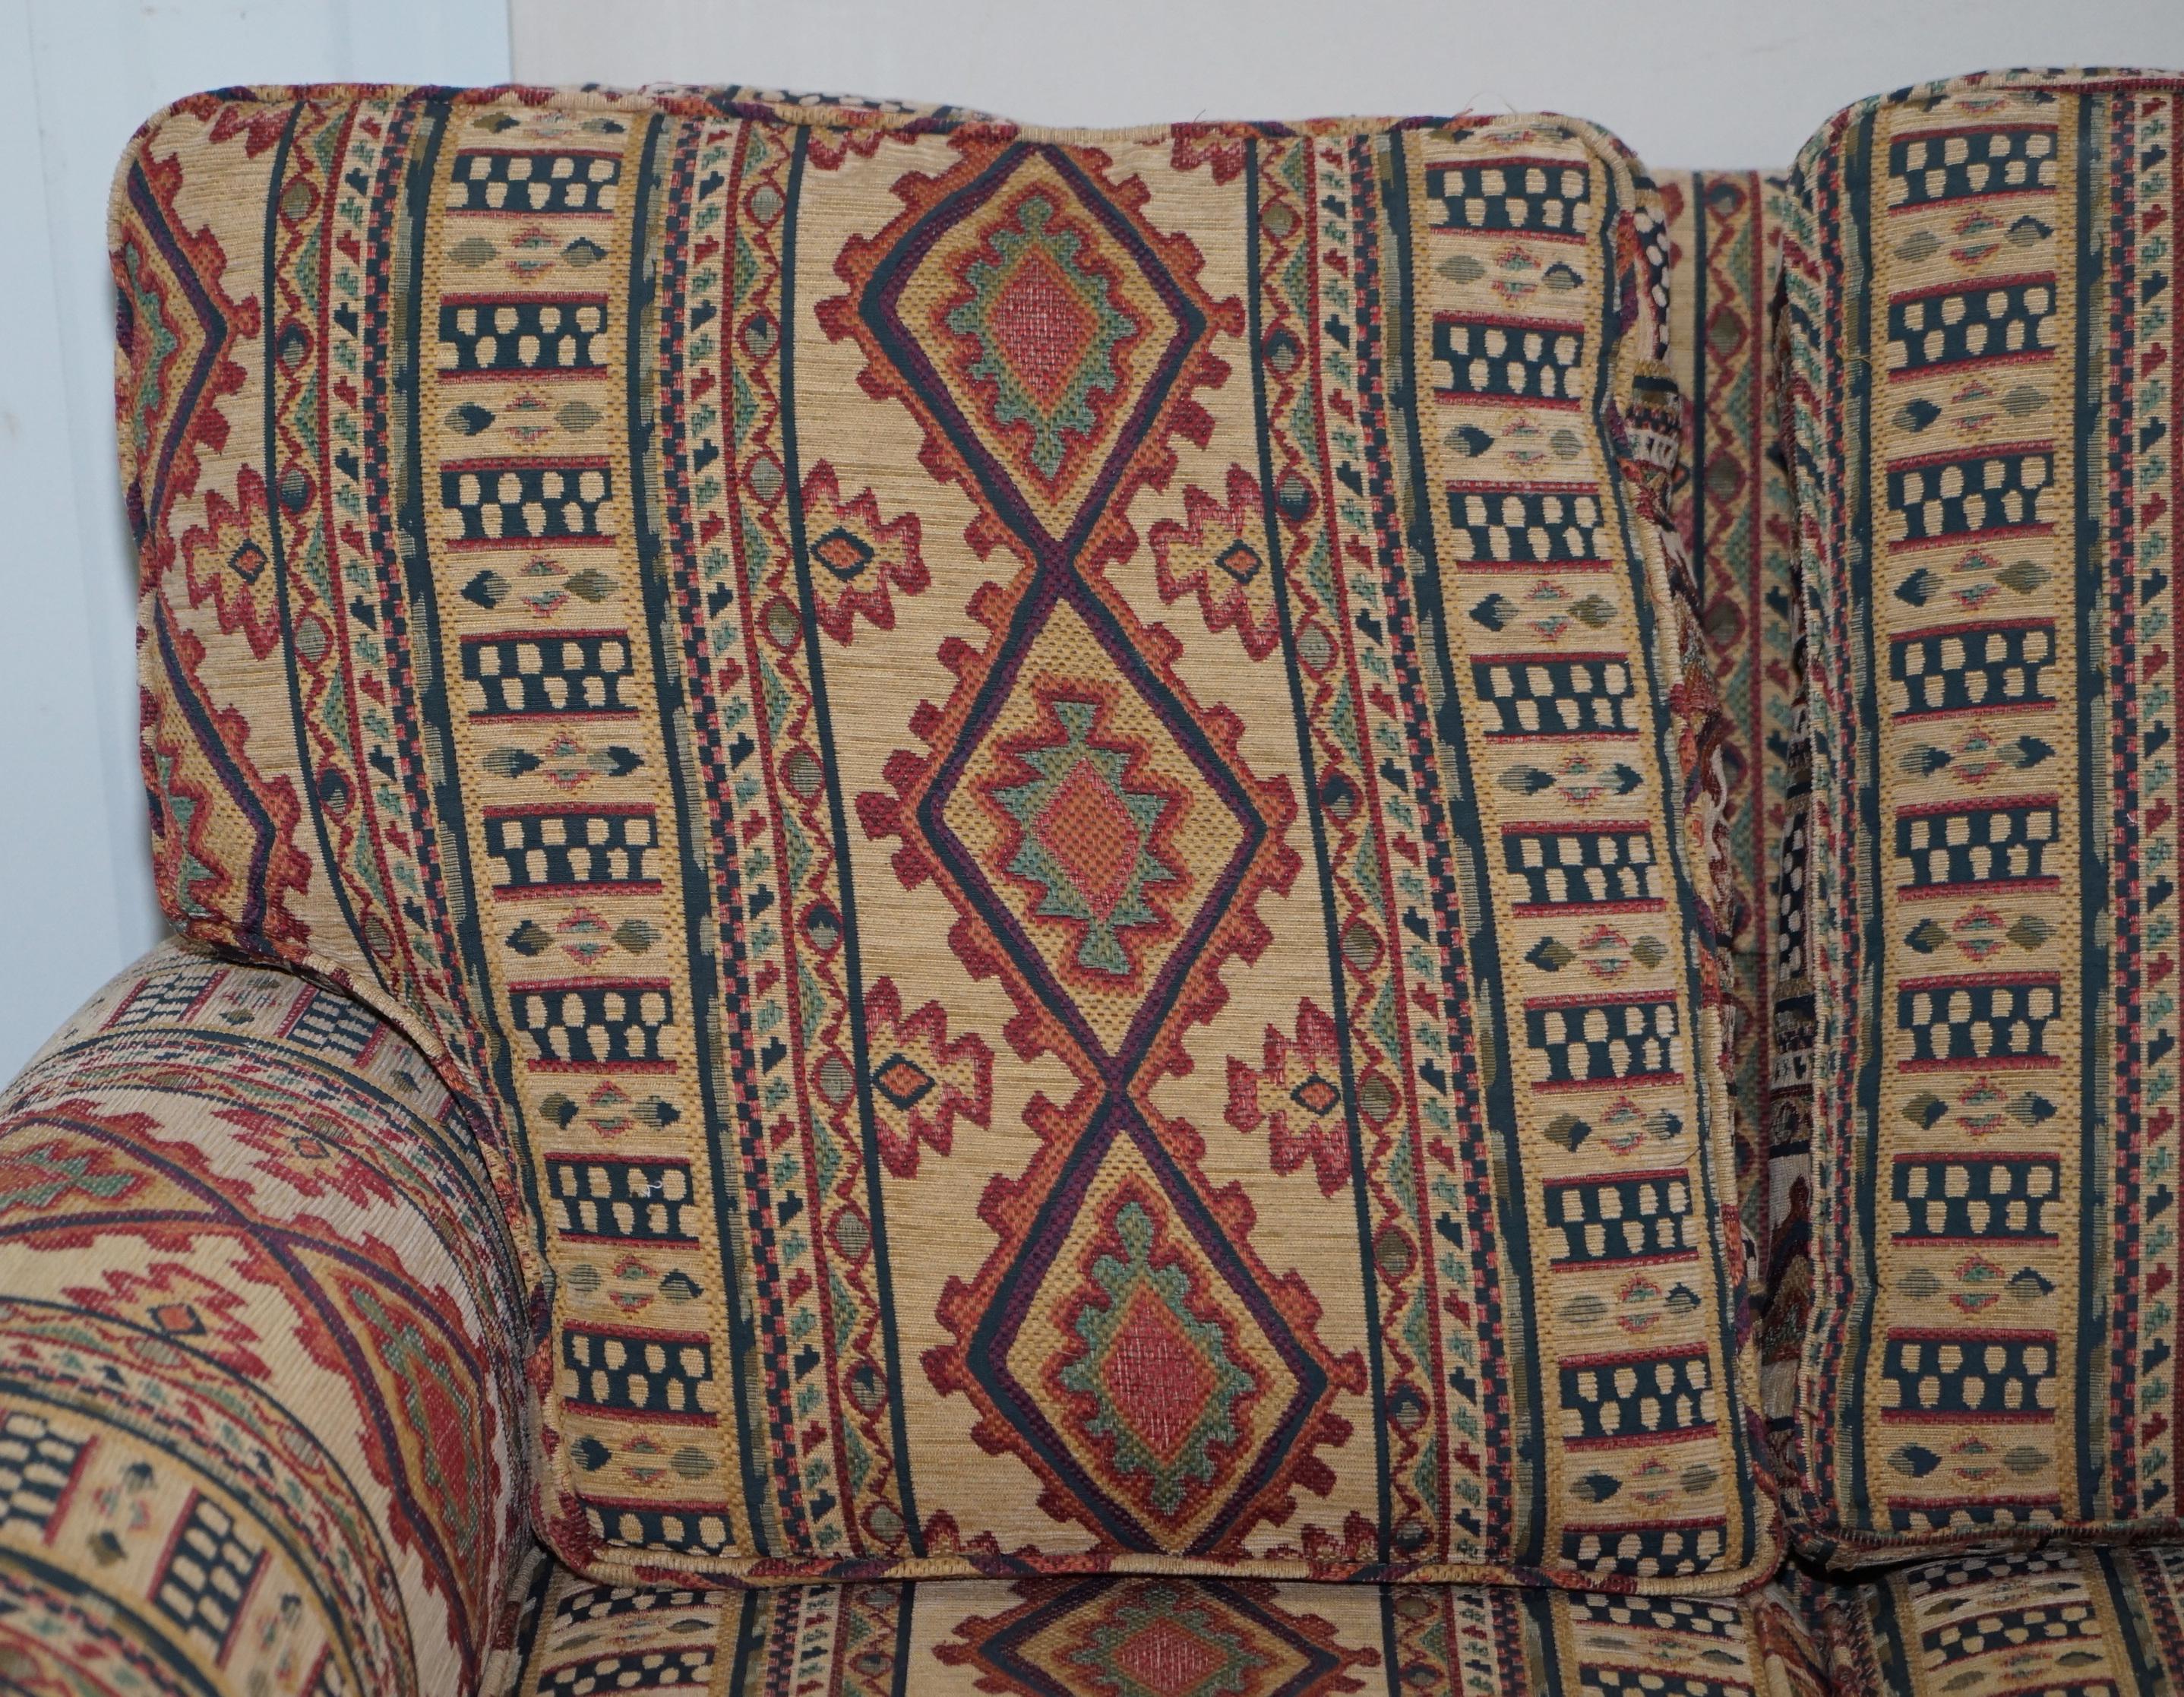 Midcentury Fully Sprung Art Deco Style Kilim Rug Upholstered Sofa Part of Suite For Sale 2